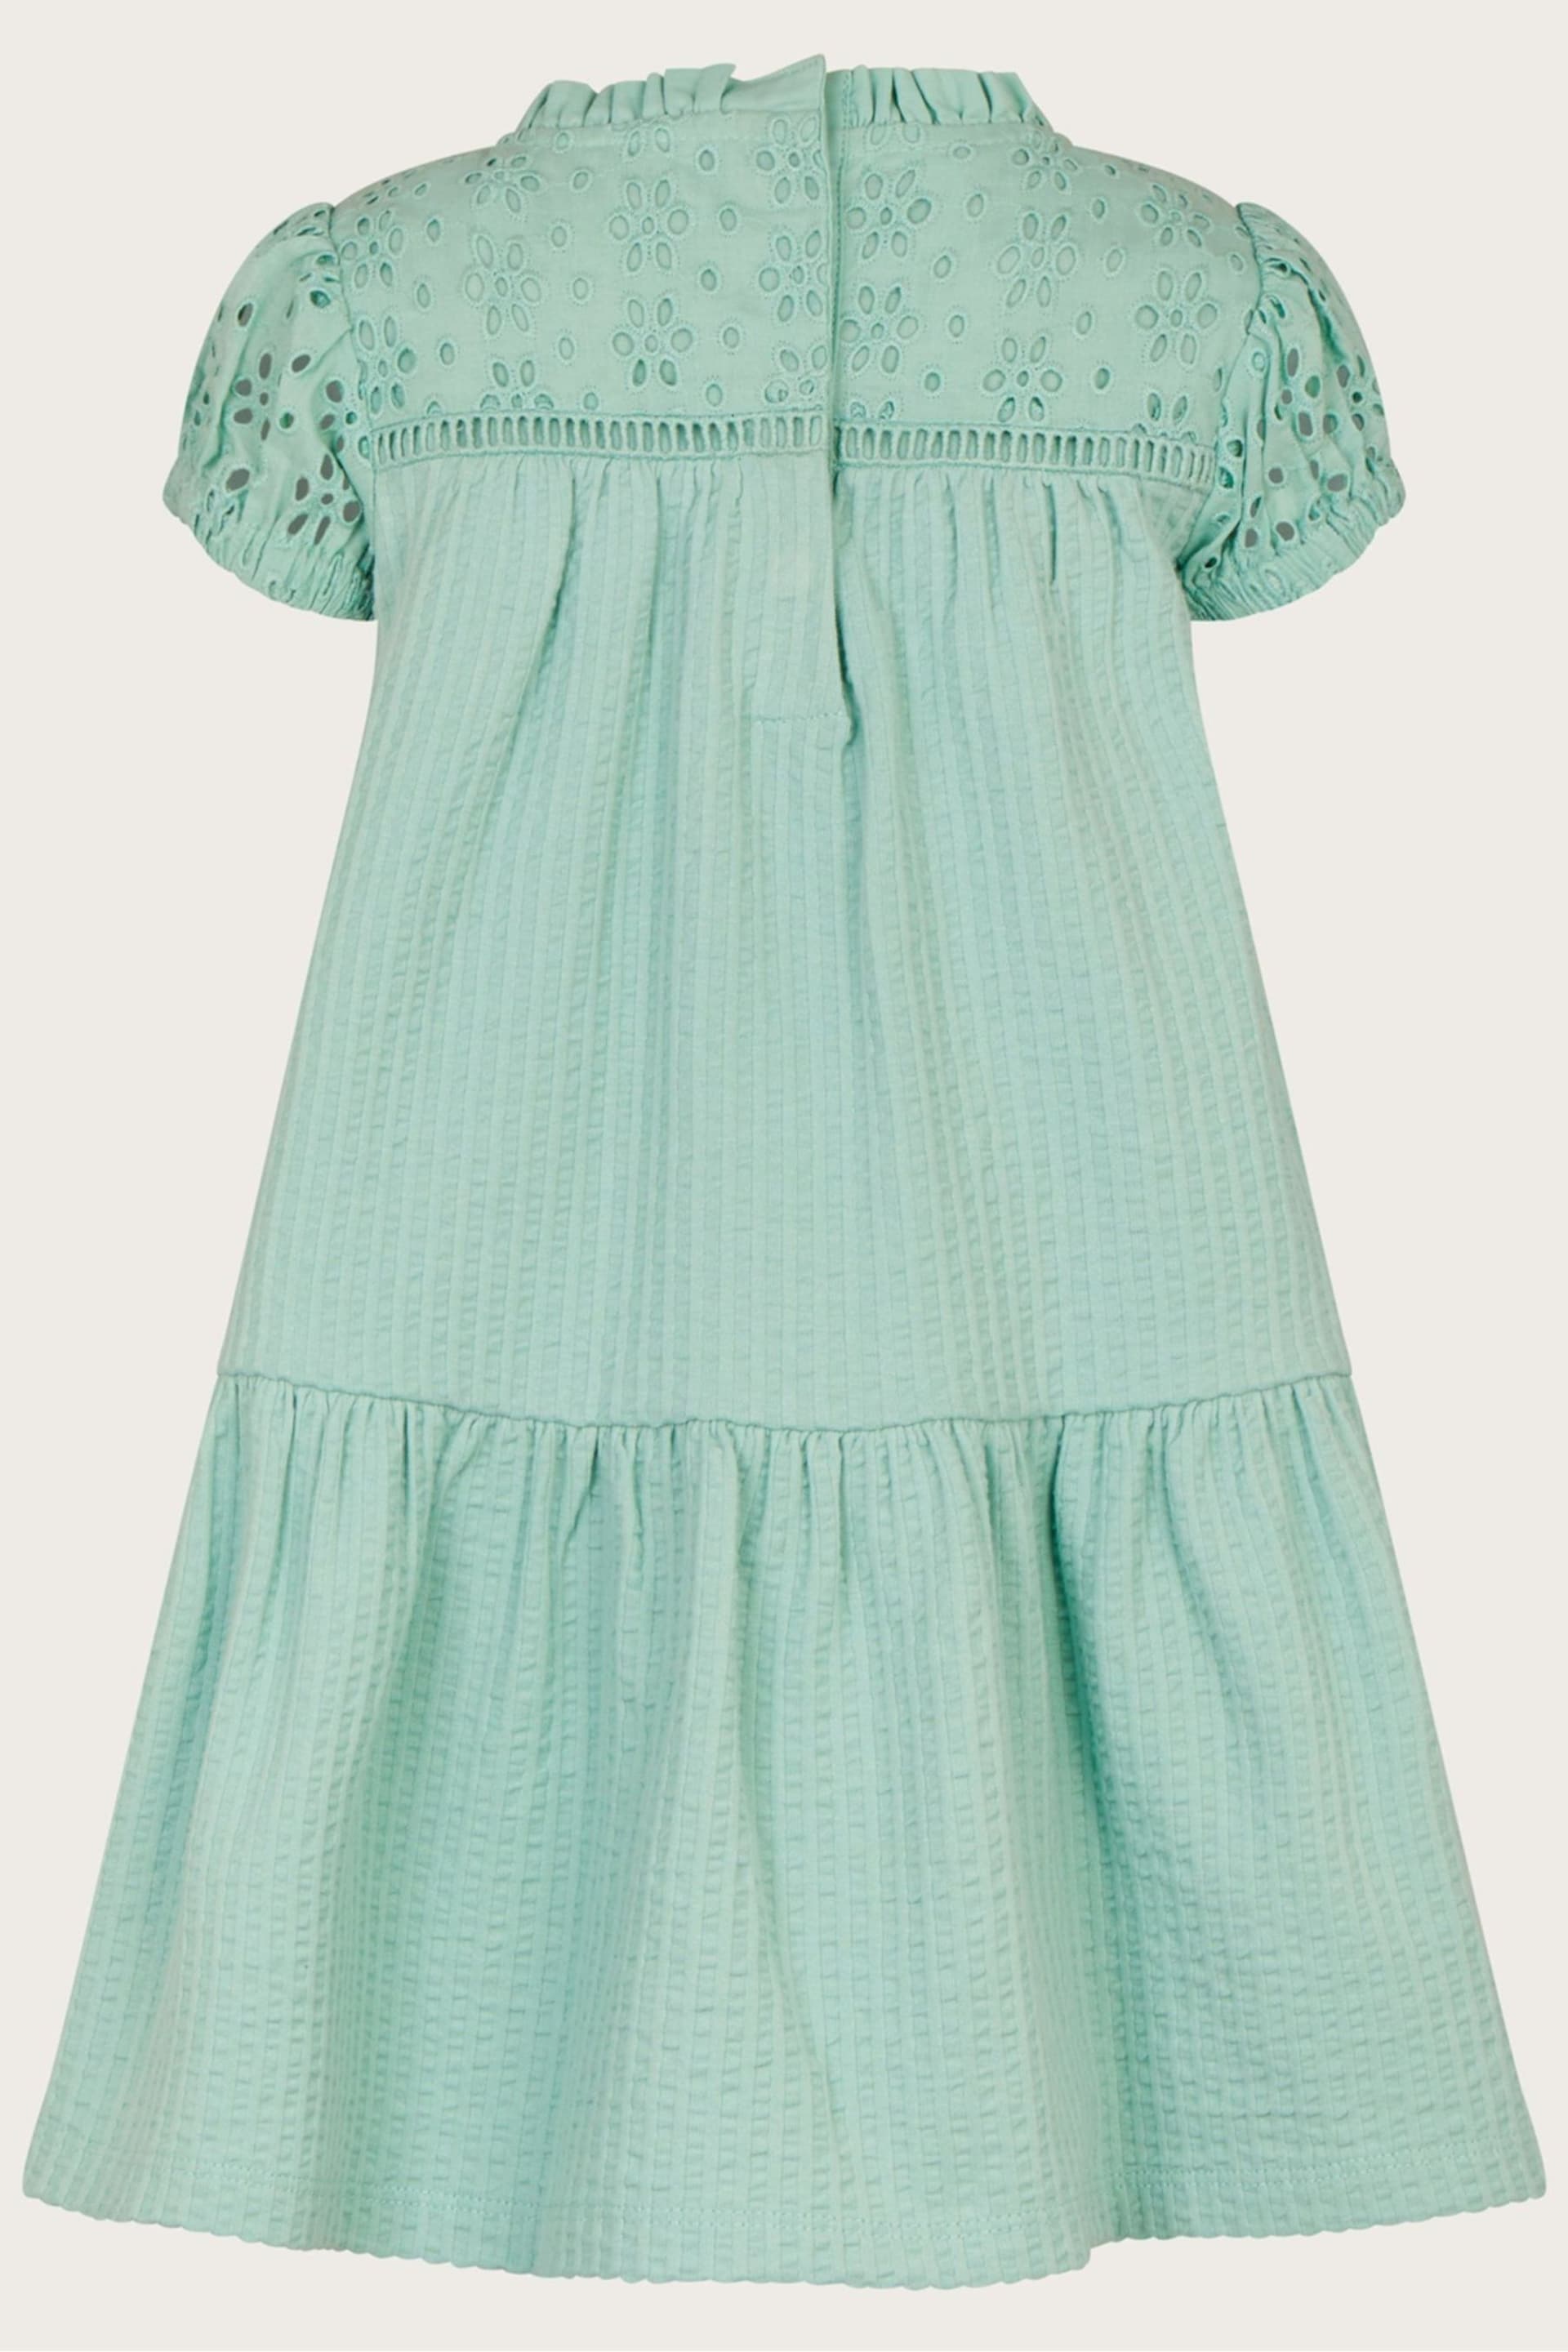 Monsoon Blue Baby Broderie Dress - Image 2 of 3